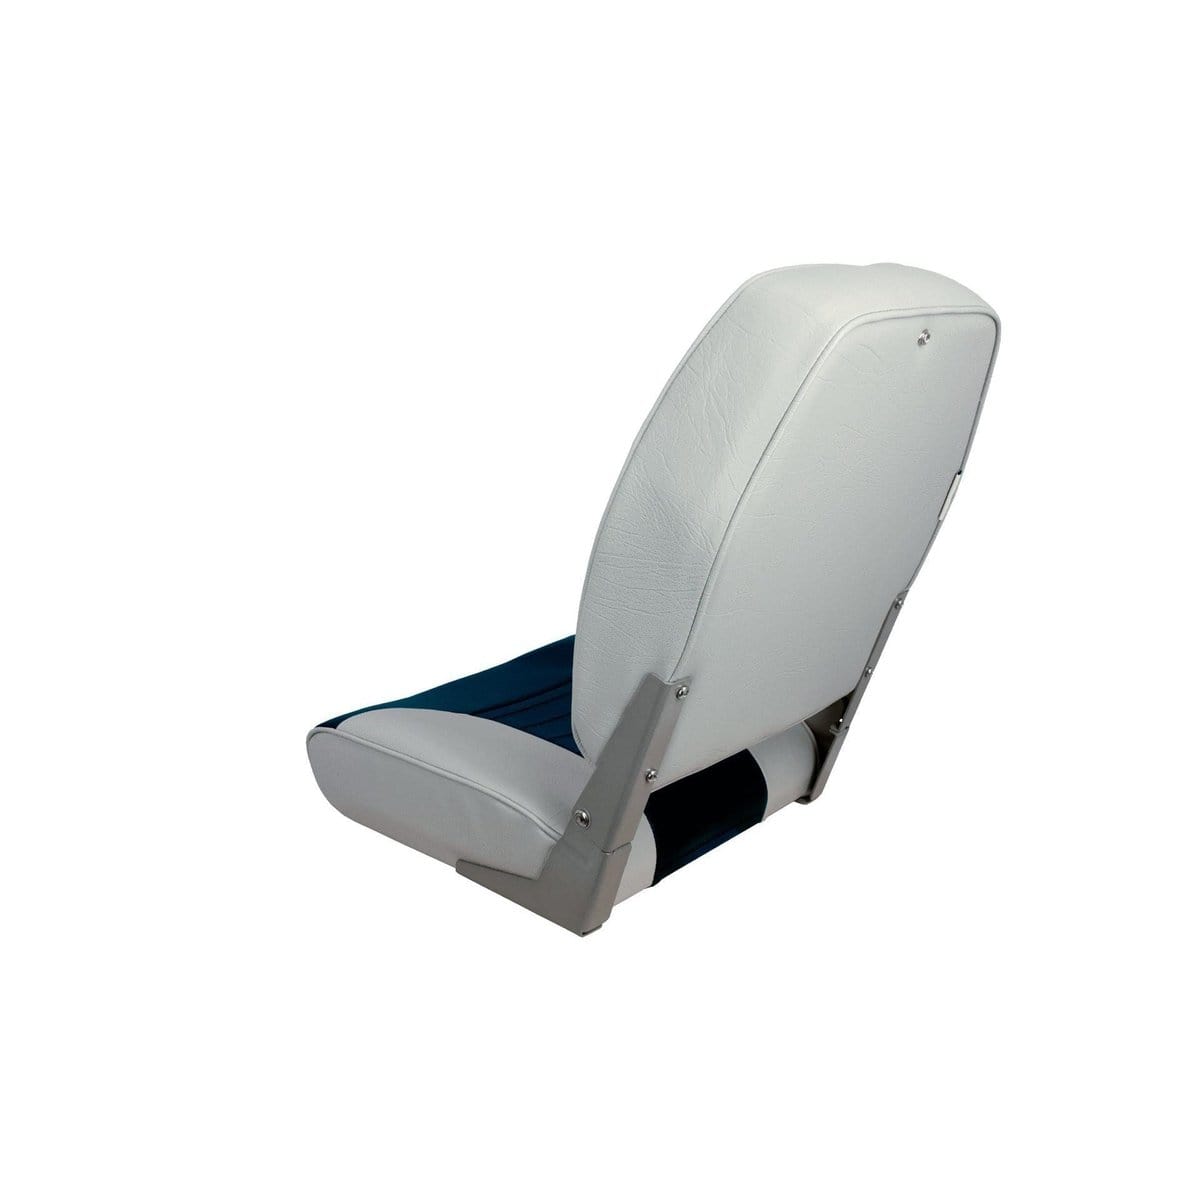 Springfield Qualifies for Free Shipping Springfield Economy Seat High-Back Gray/Blue #1040661